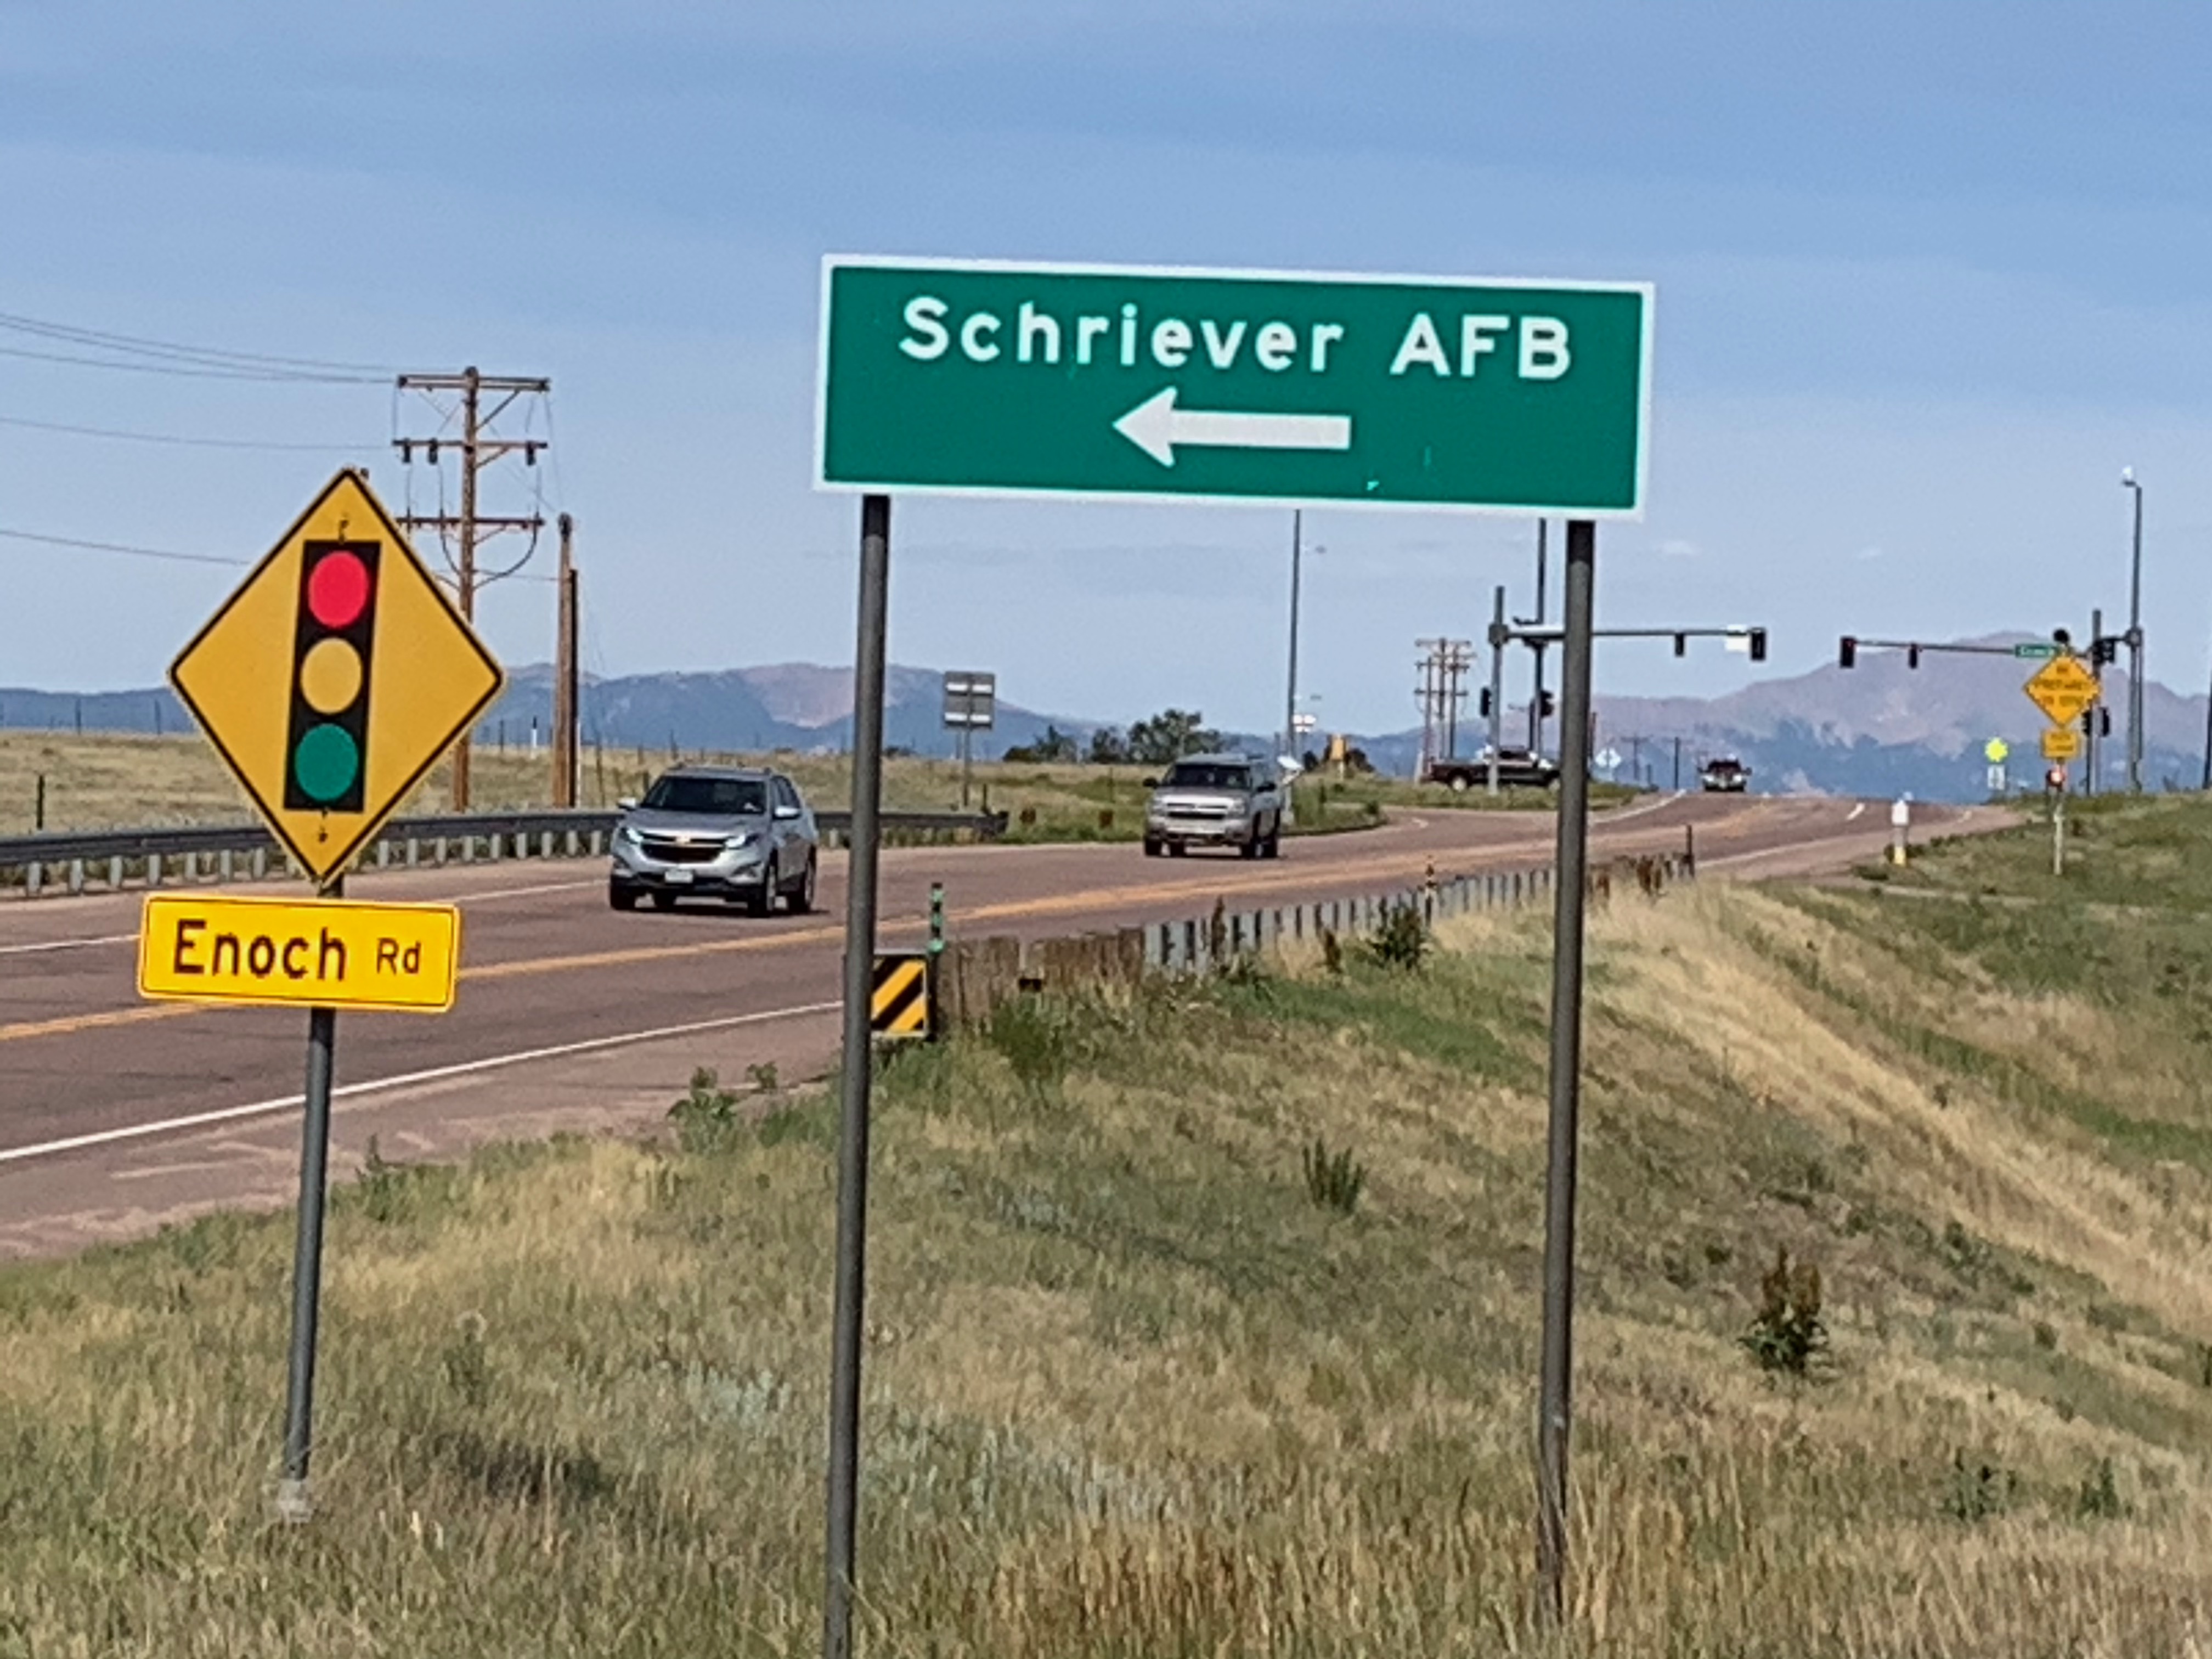 Military access, Schreiver sign detail image